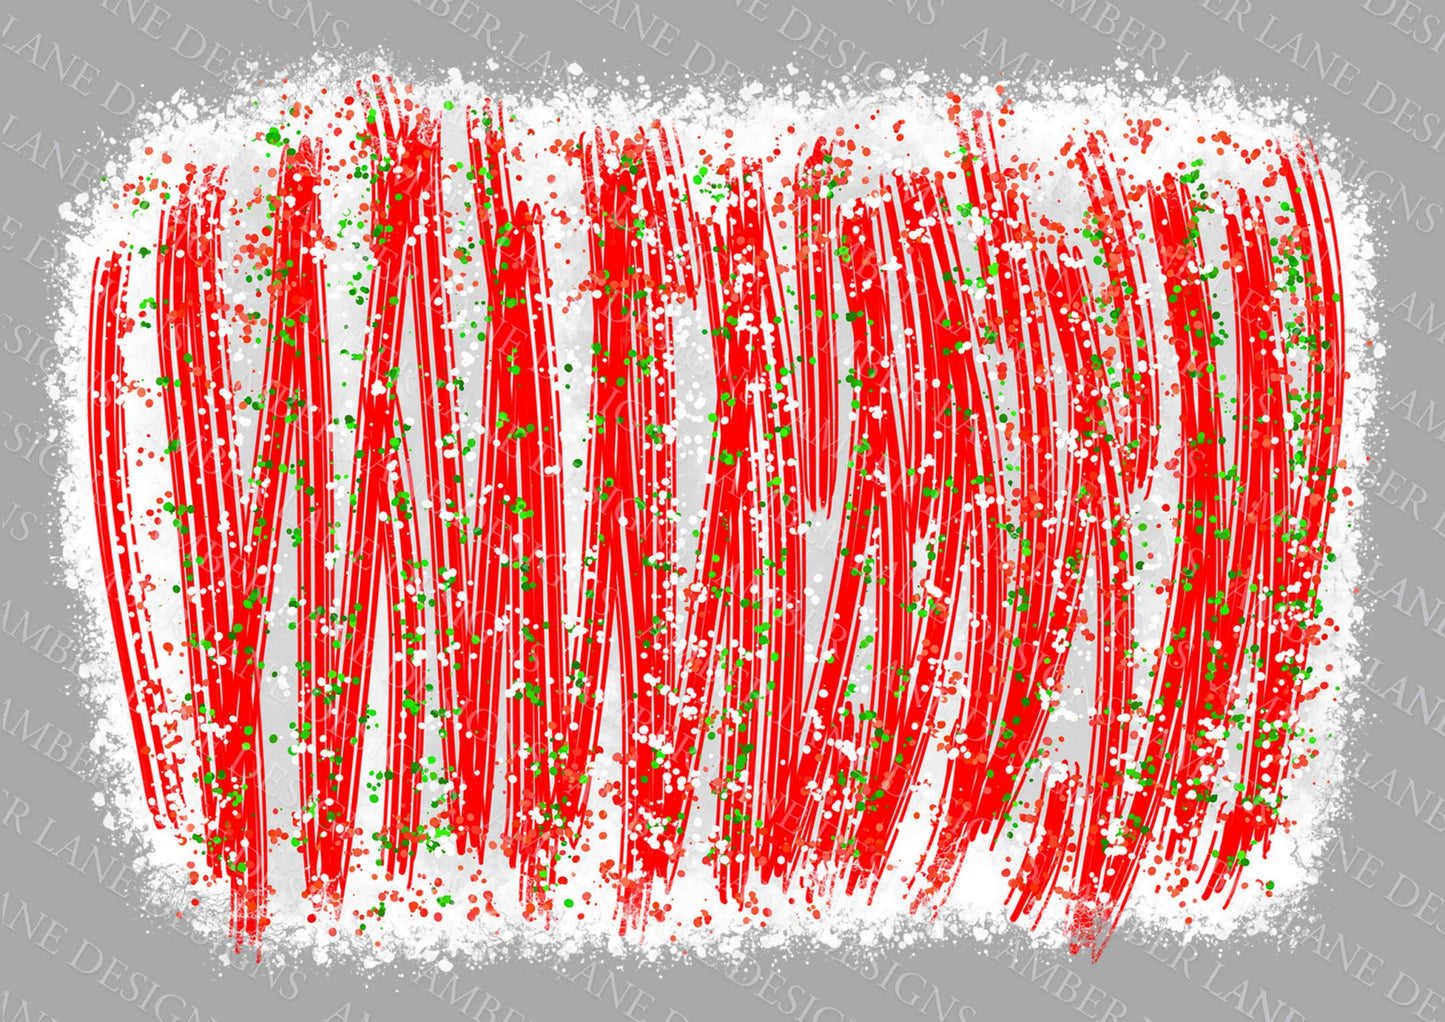 Candy Cane Bliss: Peppermint Christmas Digital Brushstrokes Background WHITE Sugar and Spice